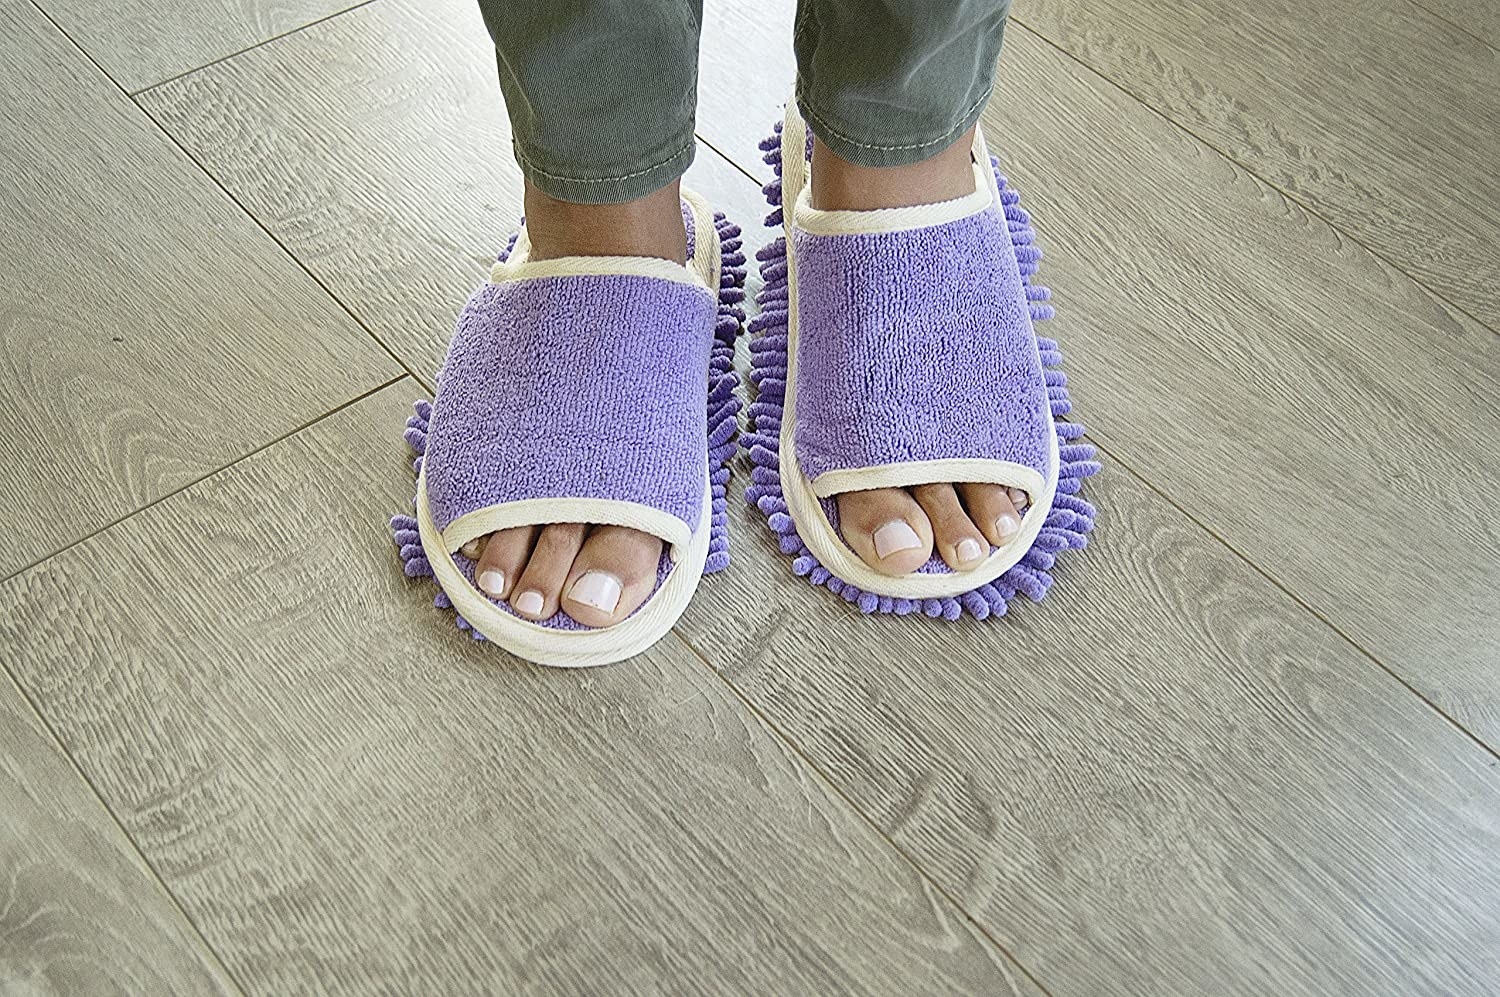 A person wearing the mop slippers 